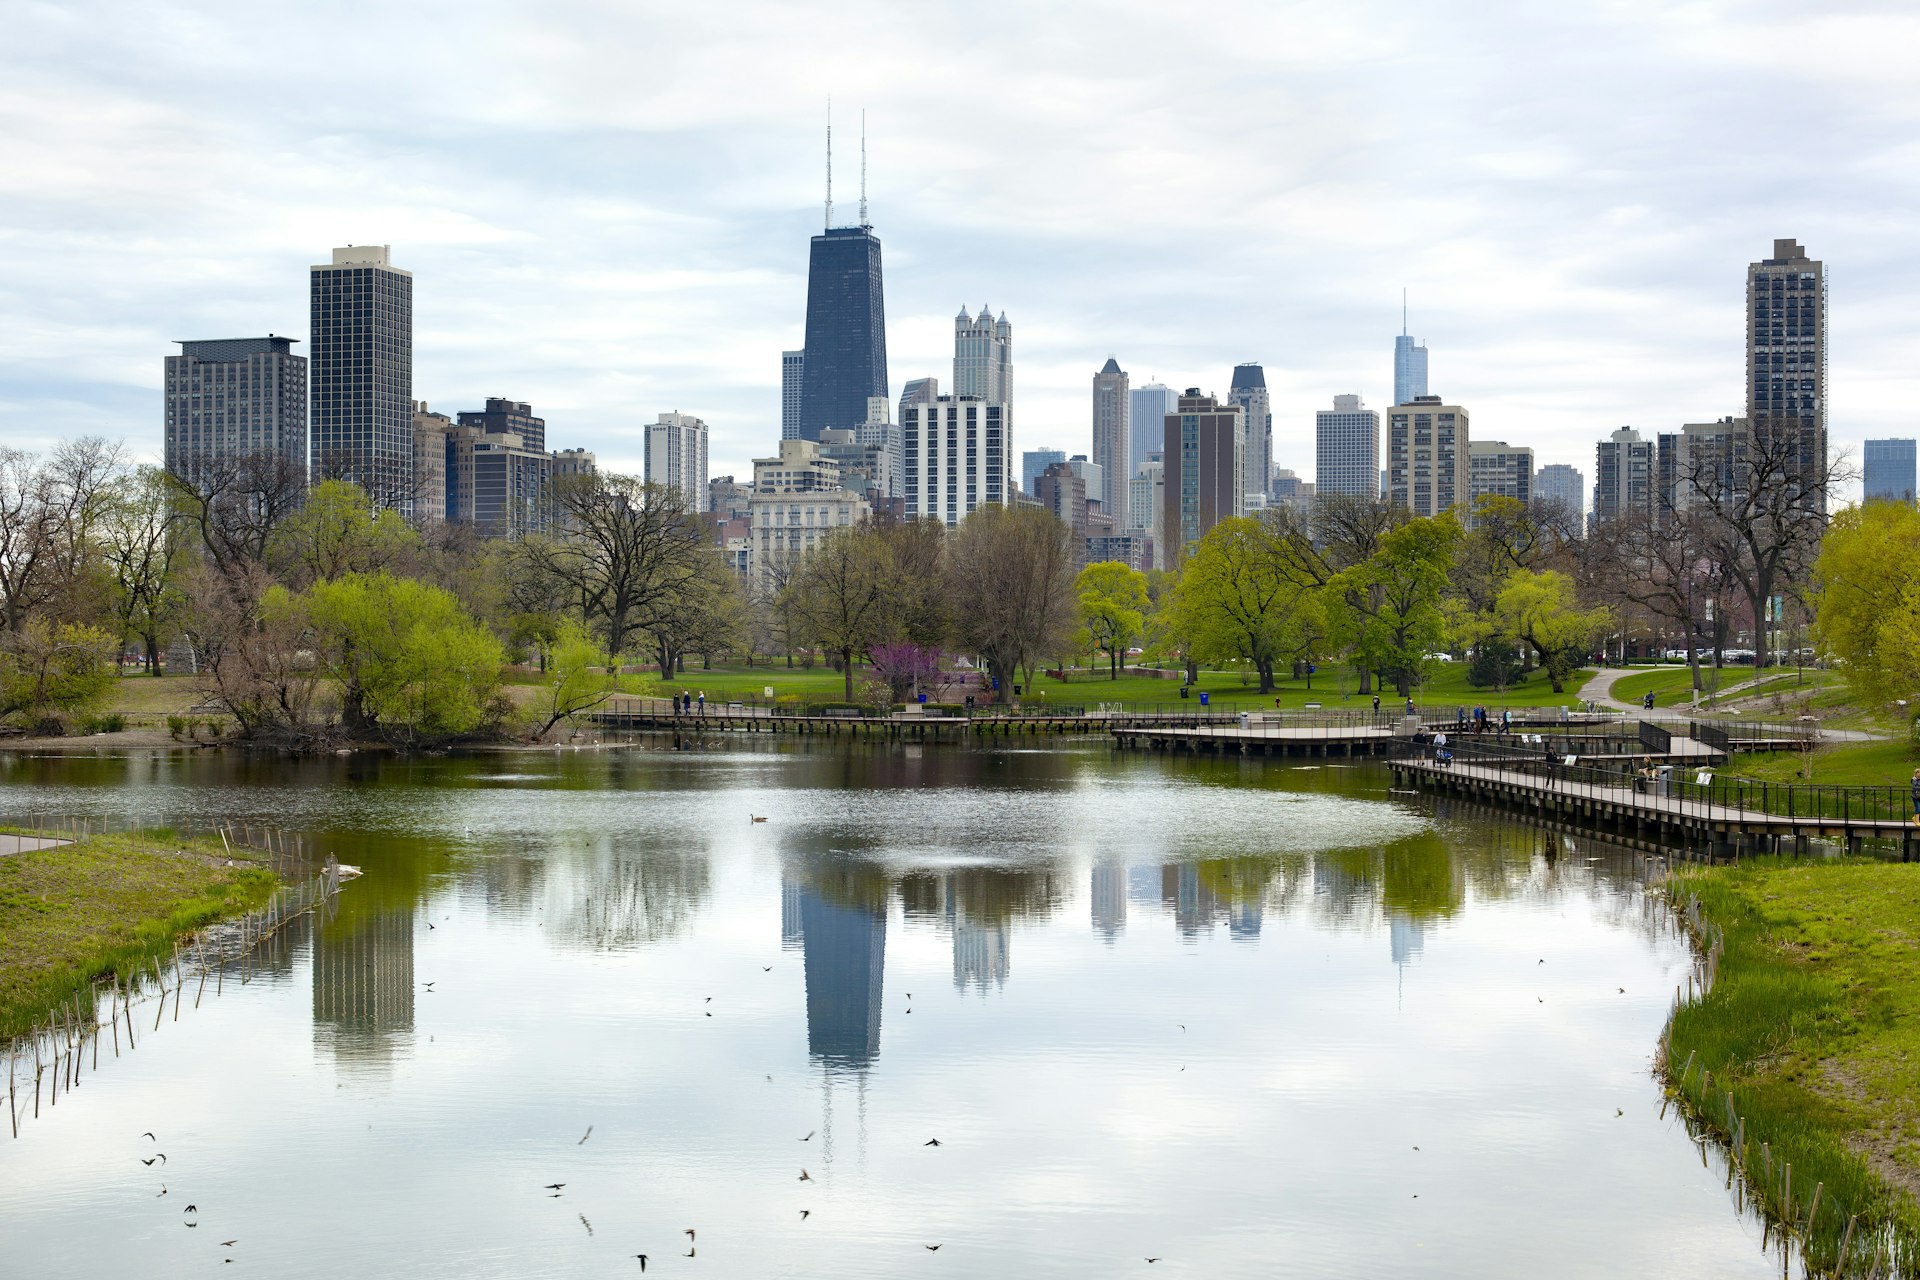 A pond and greenery in Lincoln Park frame the Chicago skyline.